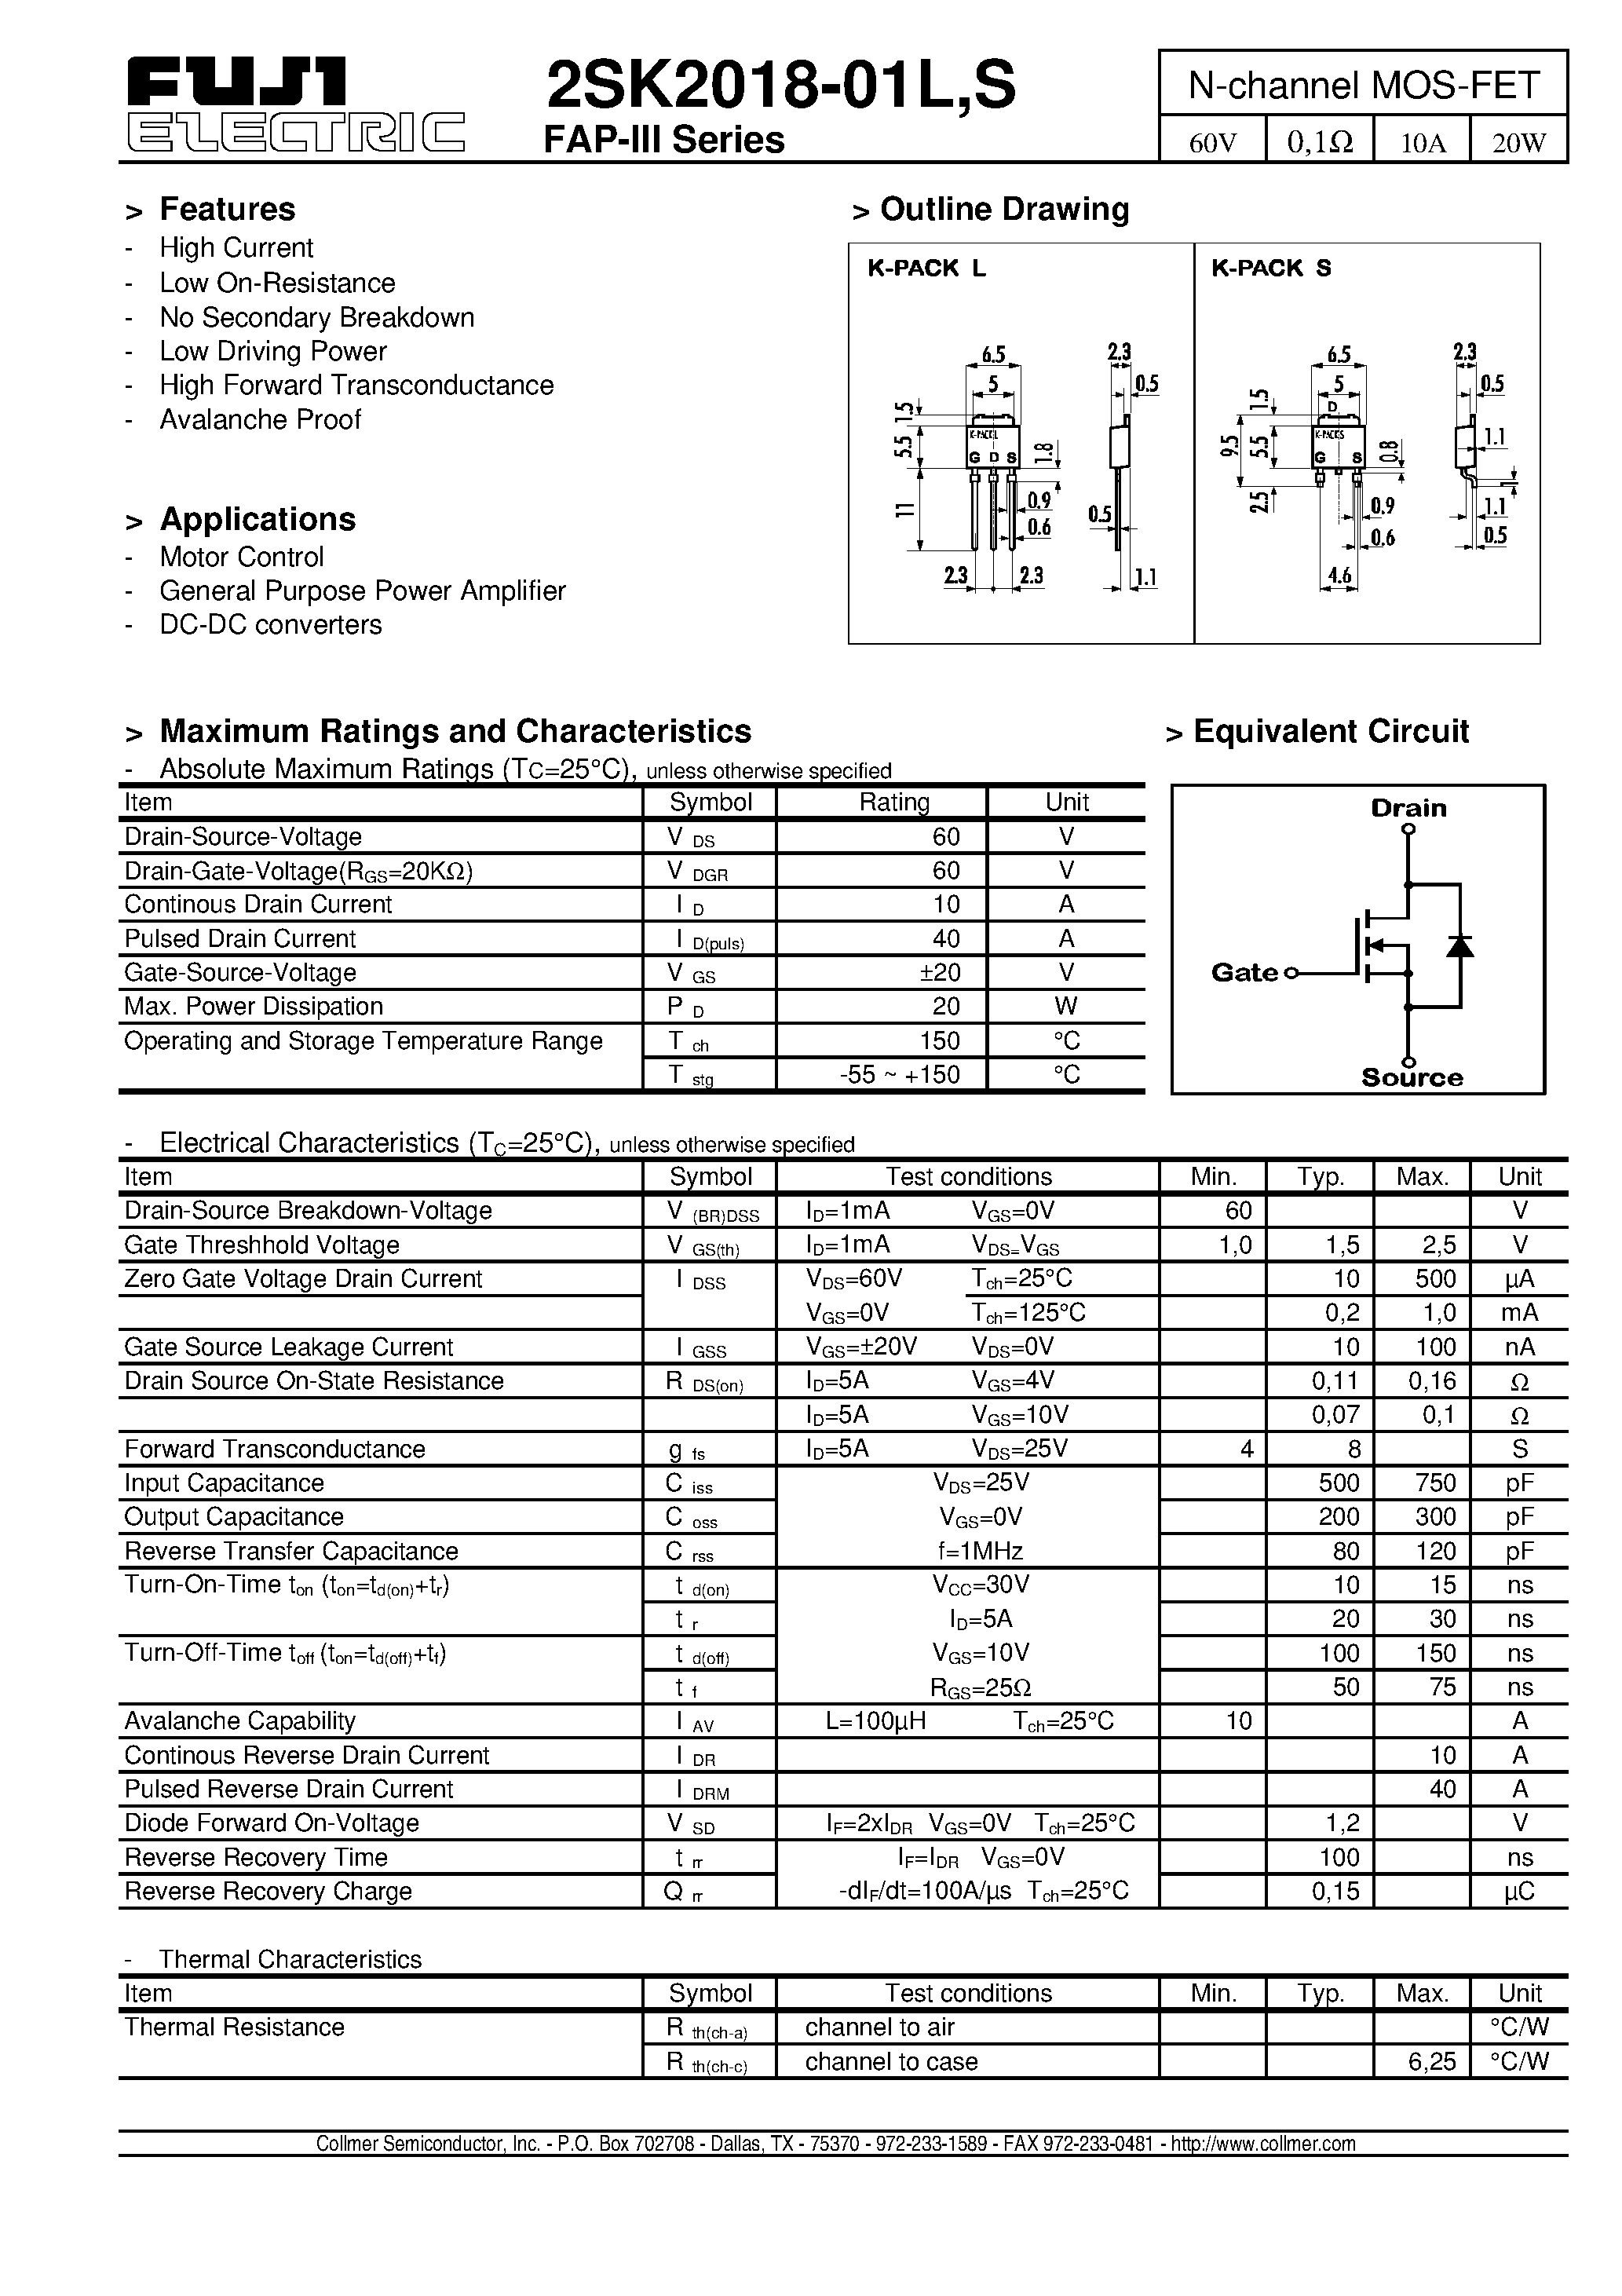 Datasheet 2SK2018 - N-channel MOS-FET page 1